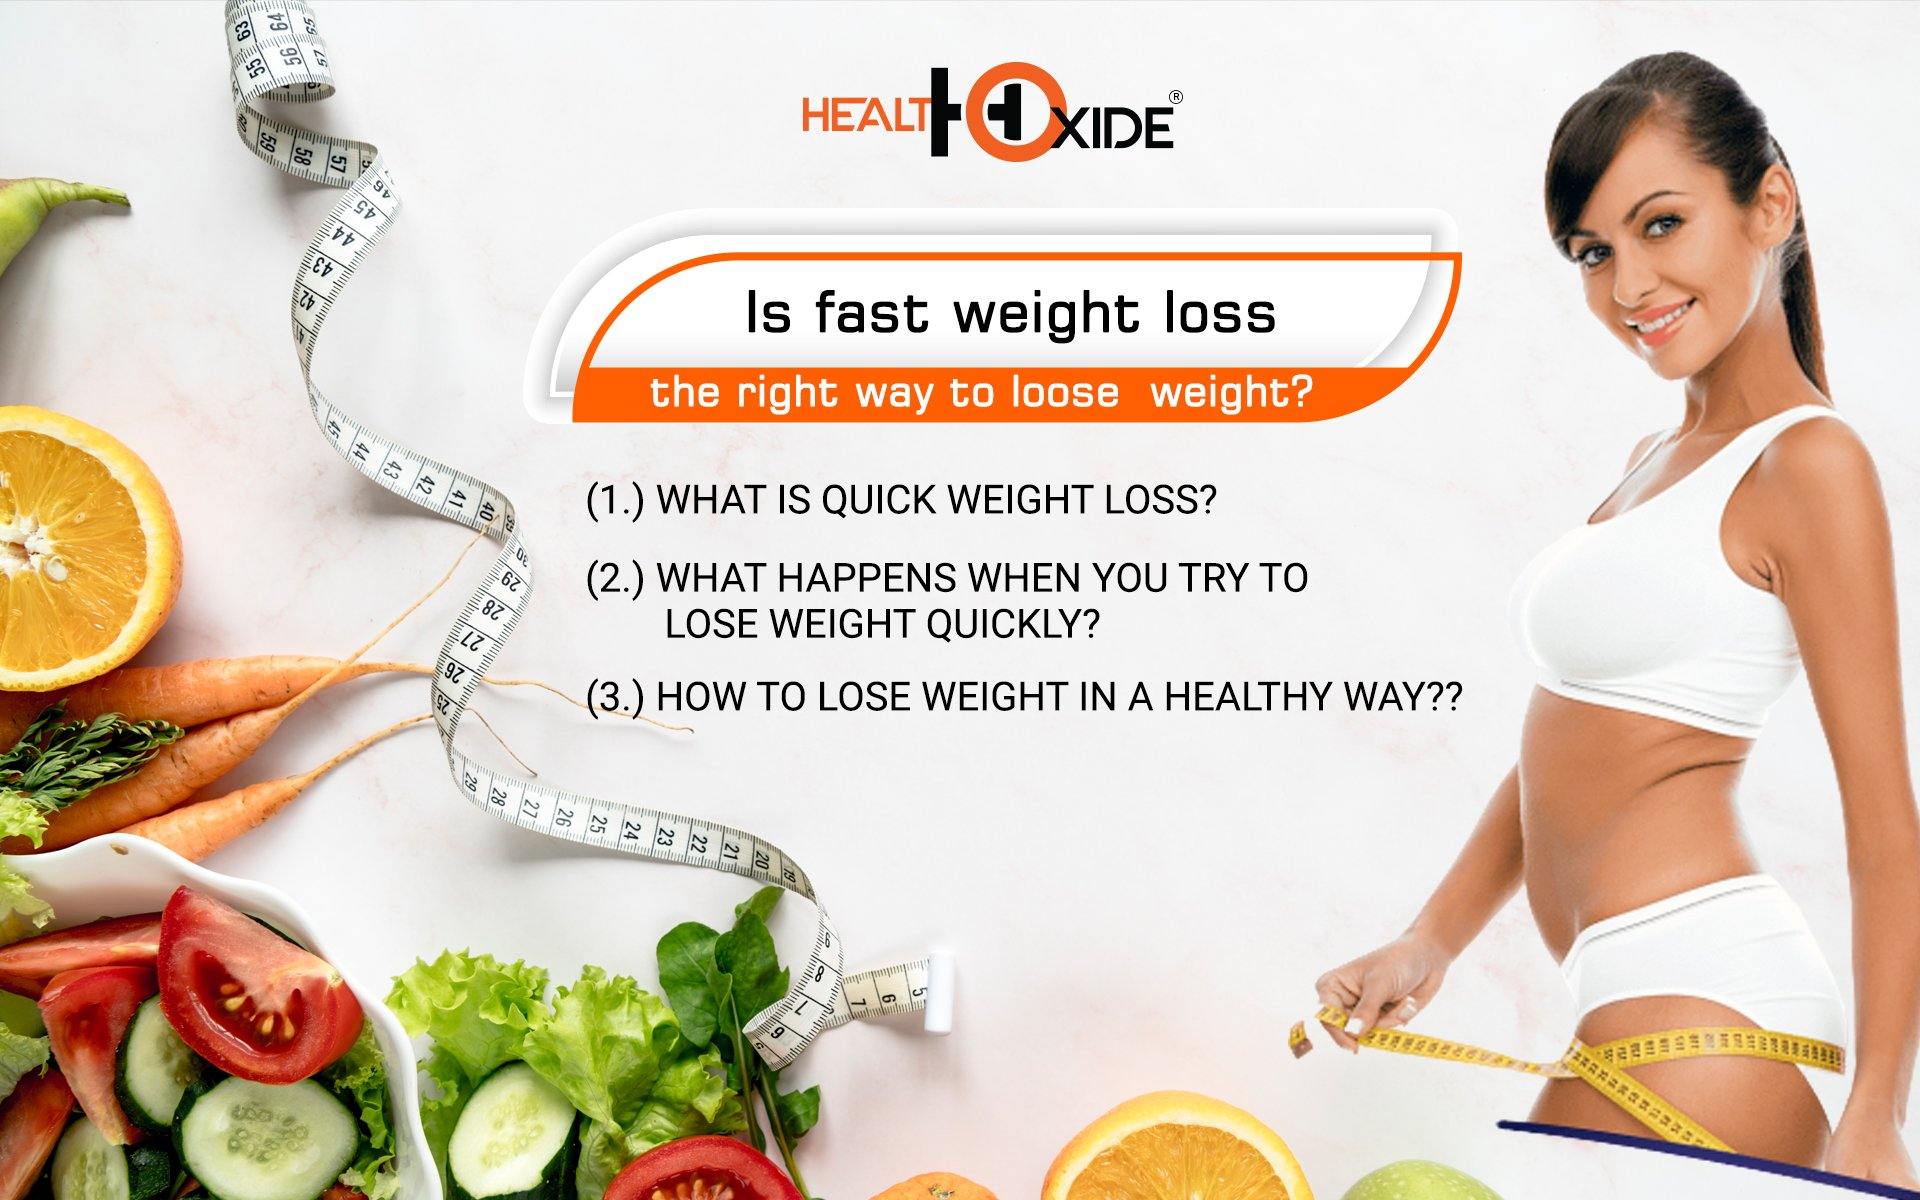 Is fast weight loss the right way to loose weight? - HealthOxide